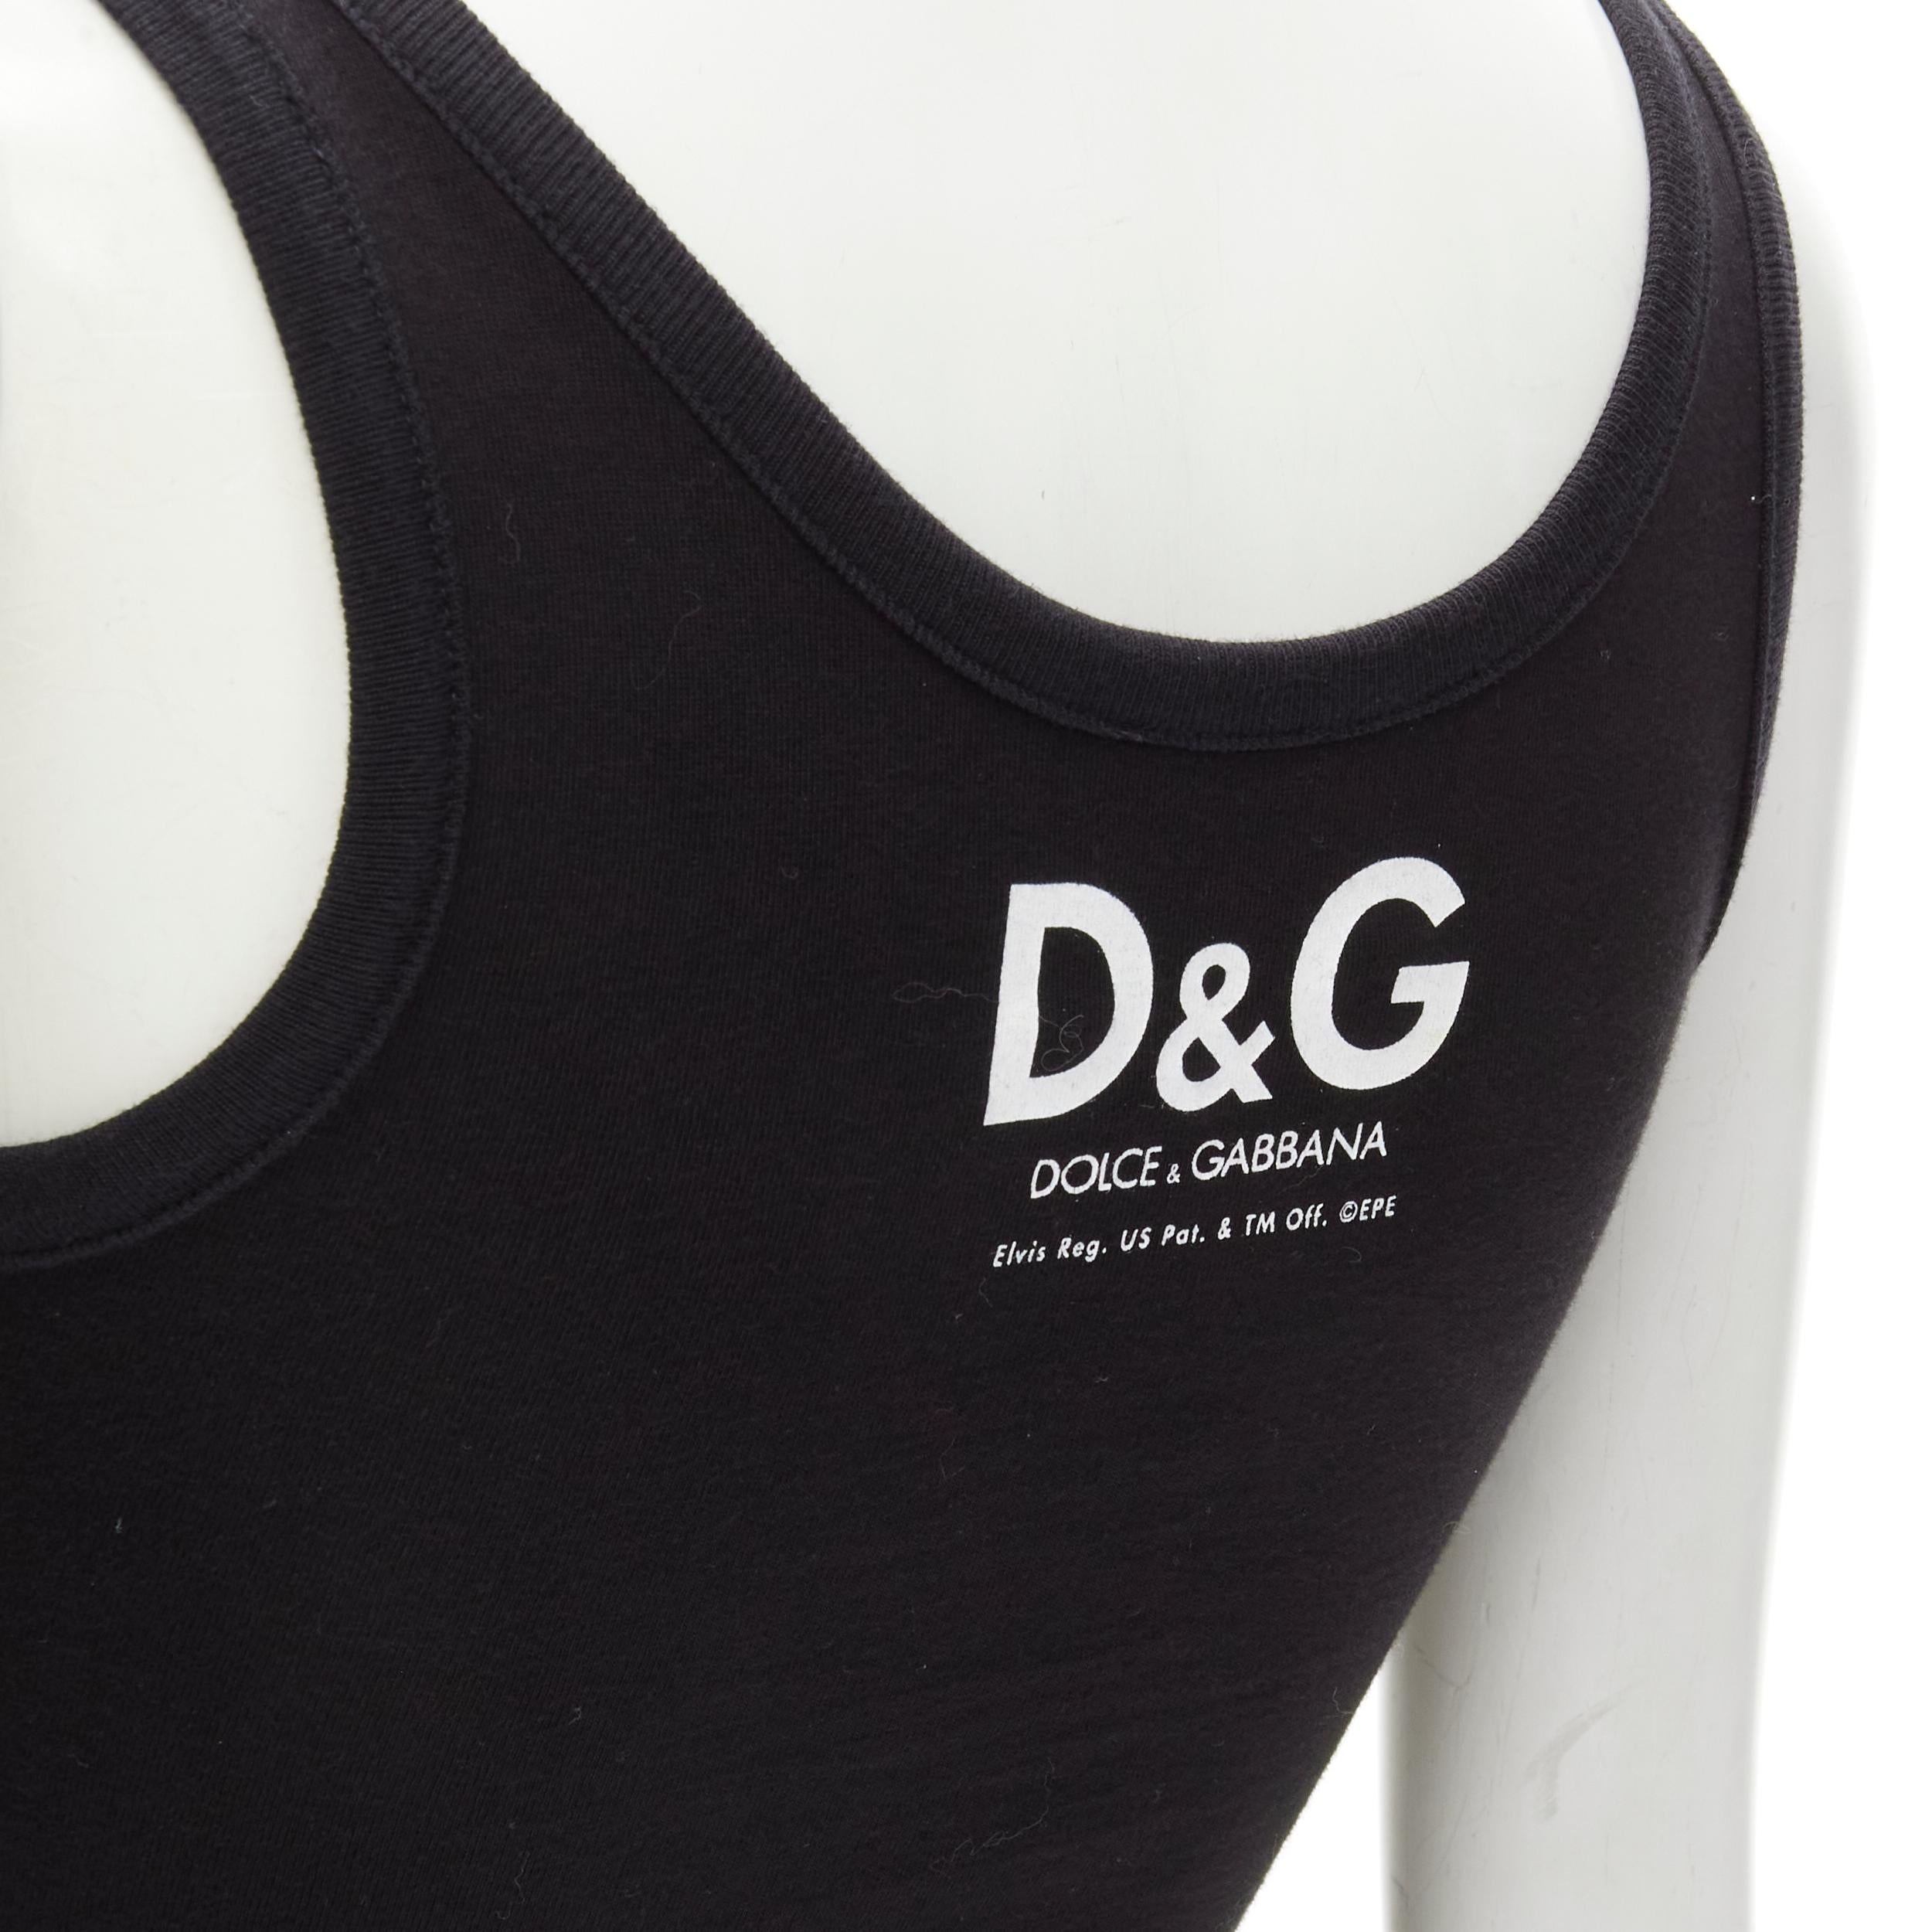 D&G DOLCE GABBANA Vintage Y2K Elvis Presley photo print ribbed trim tank top S 
Reference: ANWU/A00616 
Brand: D&G 
Material: Feels like cotton 
Color: Black 
Pattern: Elvis Photo print 

CONDITION: 
Condition: Excellent, this item was pre-owned and